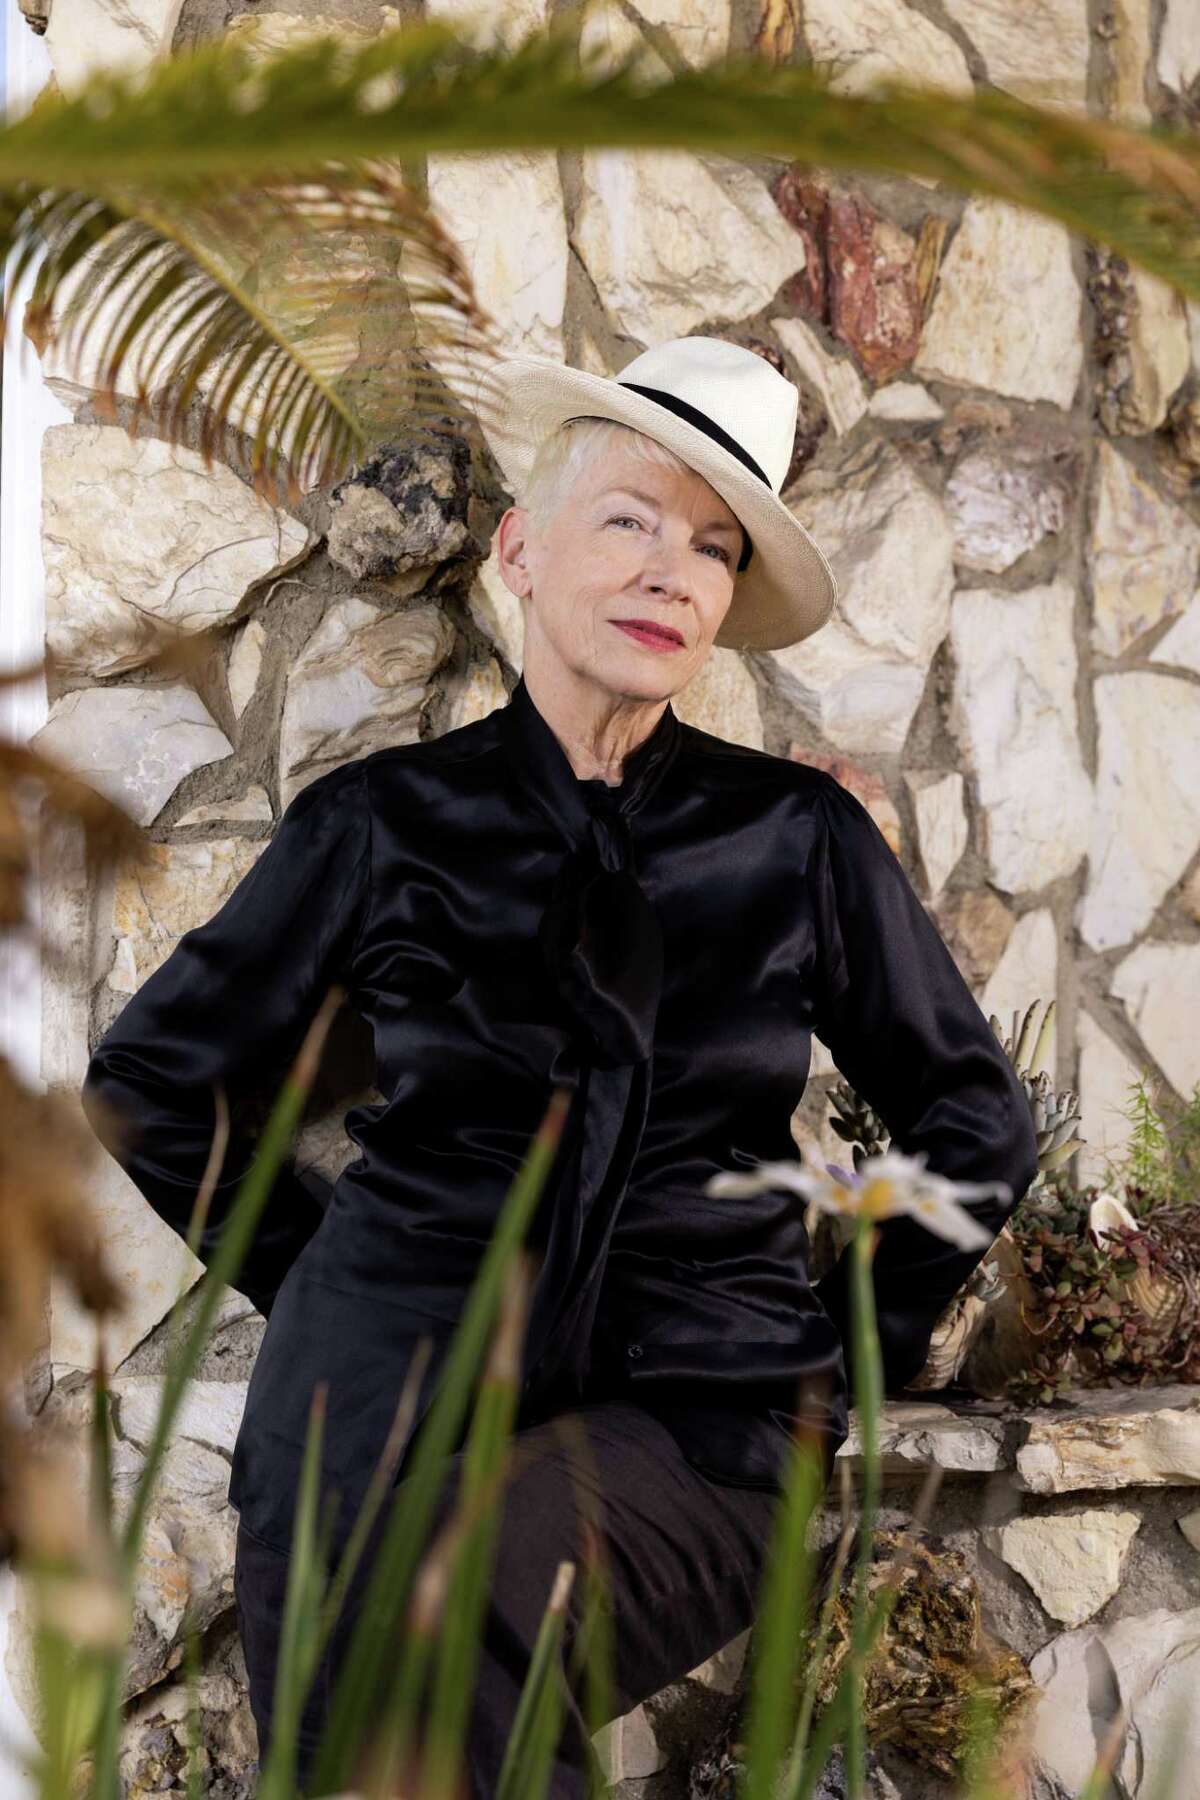 Singer Annie Lennox, 67, poses at home in Los Angeles. The onetime half of the duo Eurythmics, which had an almost decade-long run up the pop charts, became a comforting, auntie-like presence on Instagram during the pandemic.